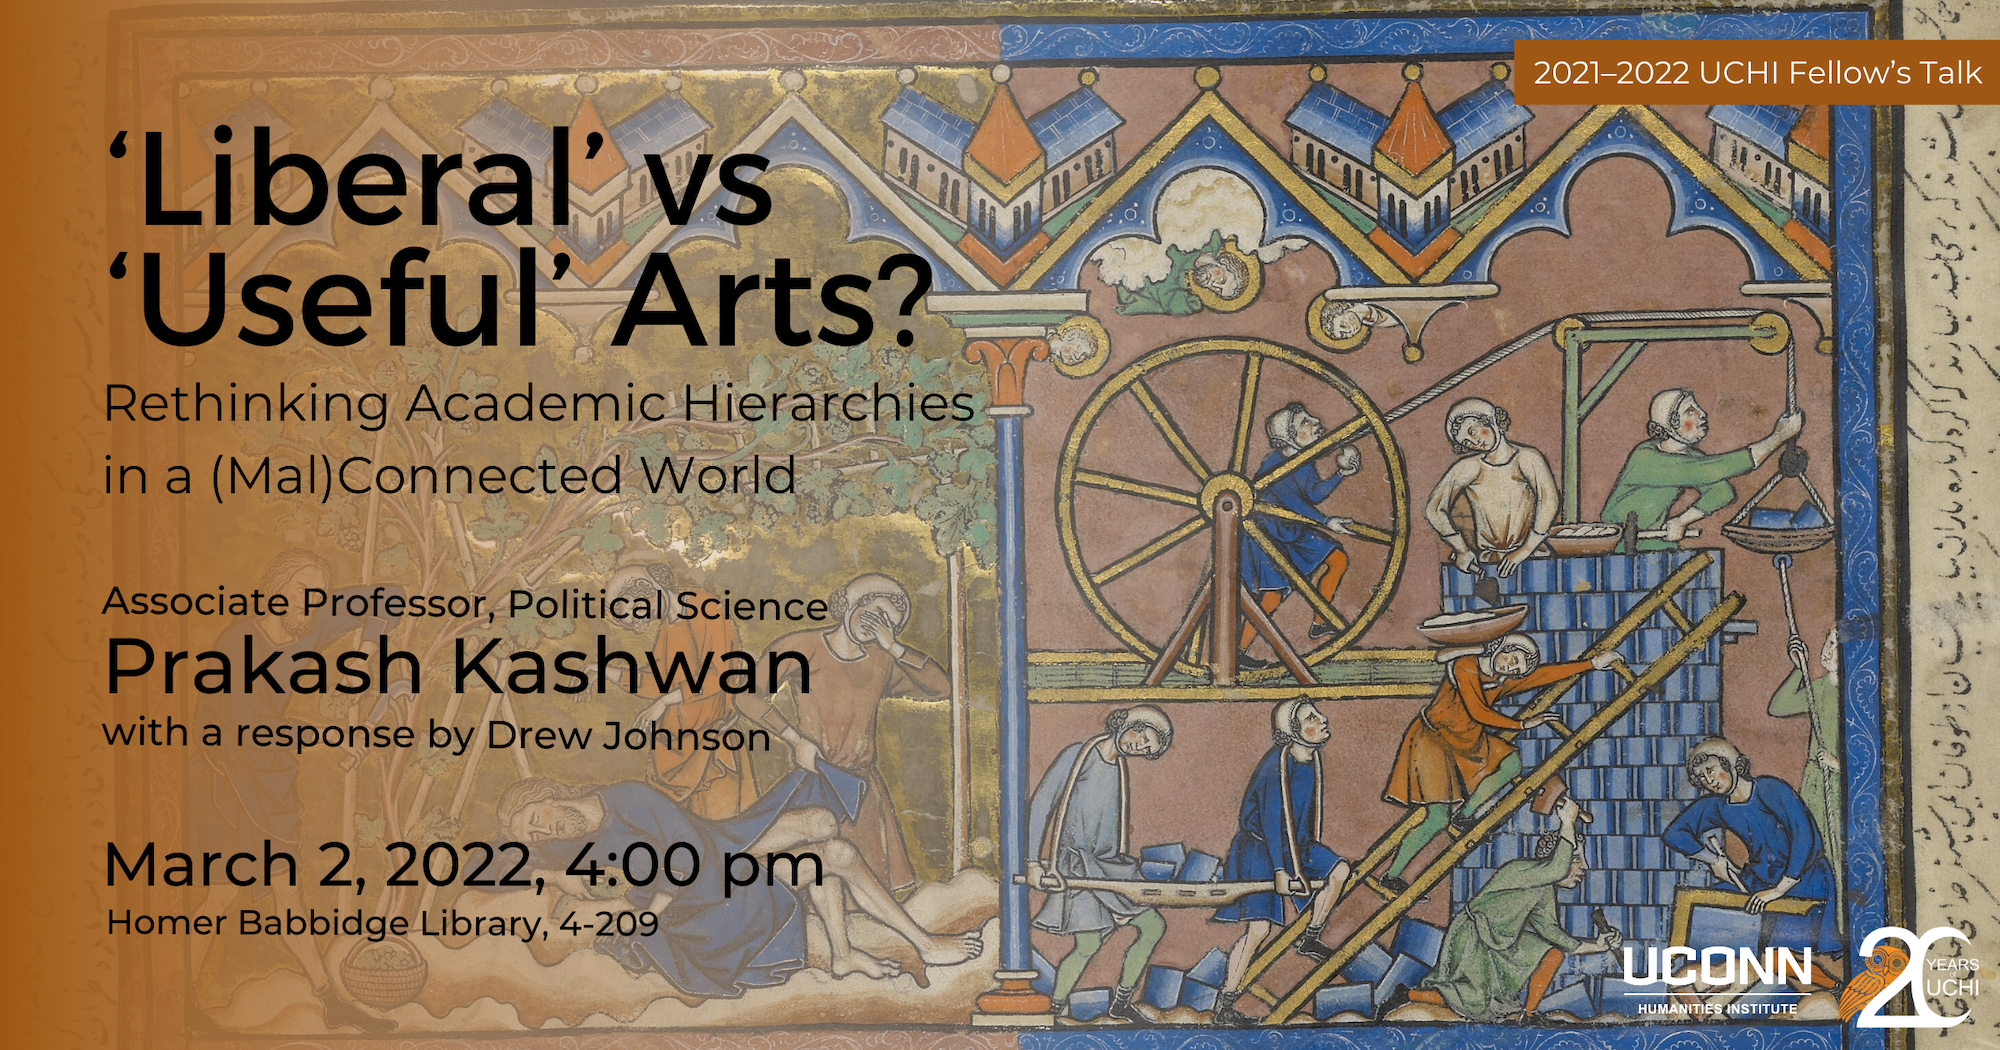 UCHI Fellow's Talk: Liberal vs Useful Arts? Rethinking Academic Hierarchies in a (Mal)Connected World. Associate Professor of Political Science, UConn, Prakash Kashwan with a response by Drew Johnson. March 2, 2022, 4:00pm, HBL 4-209.